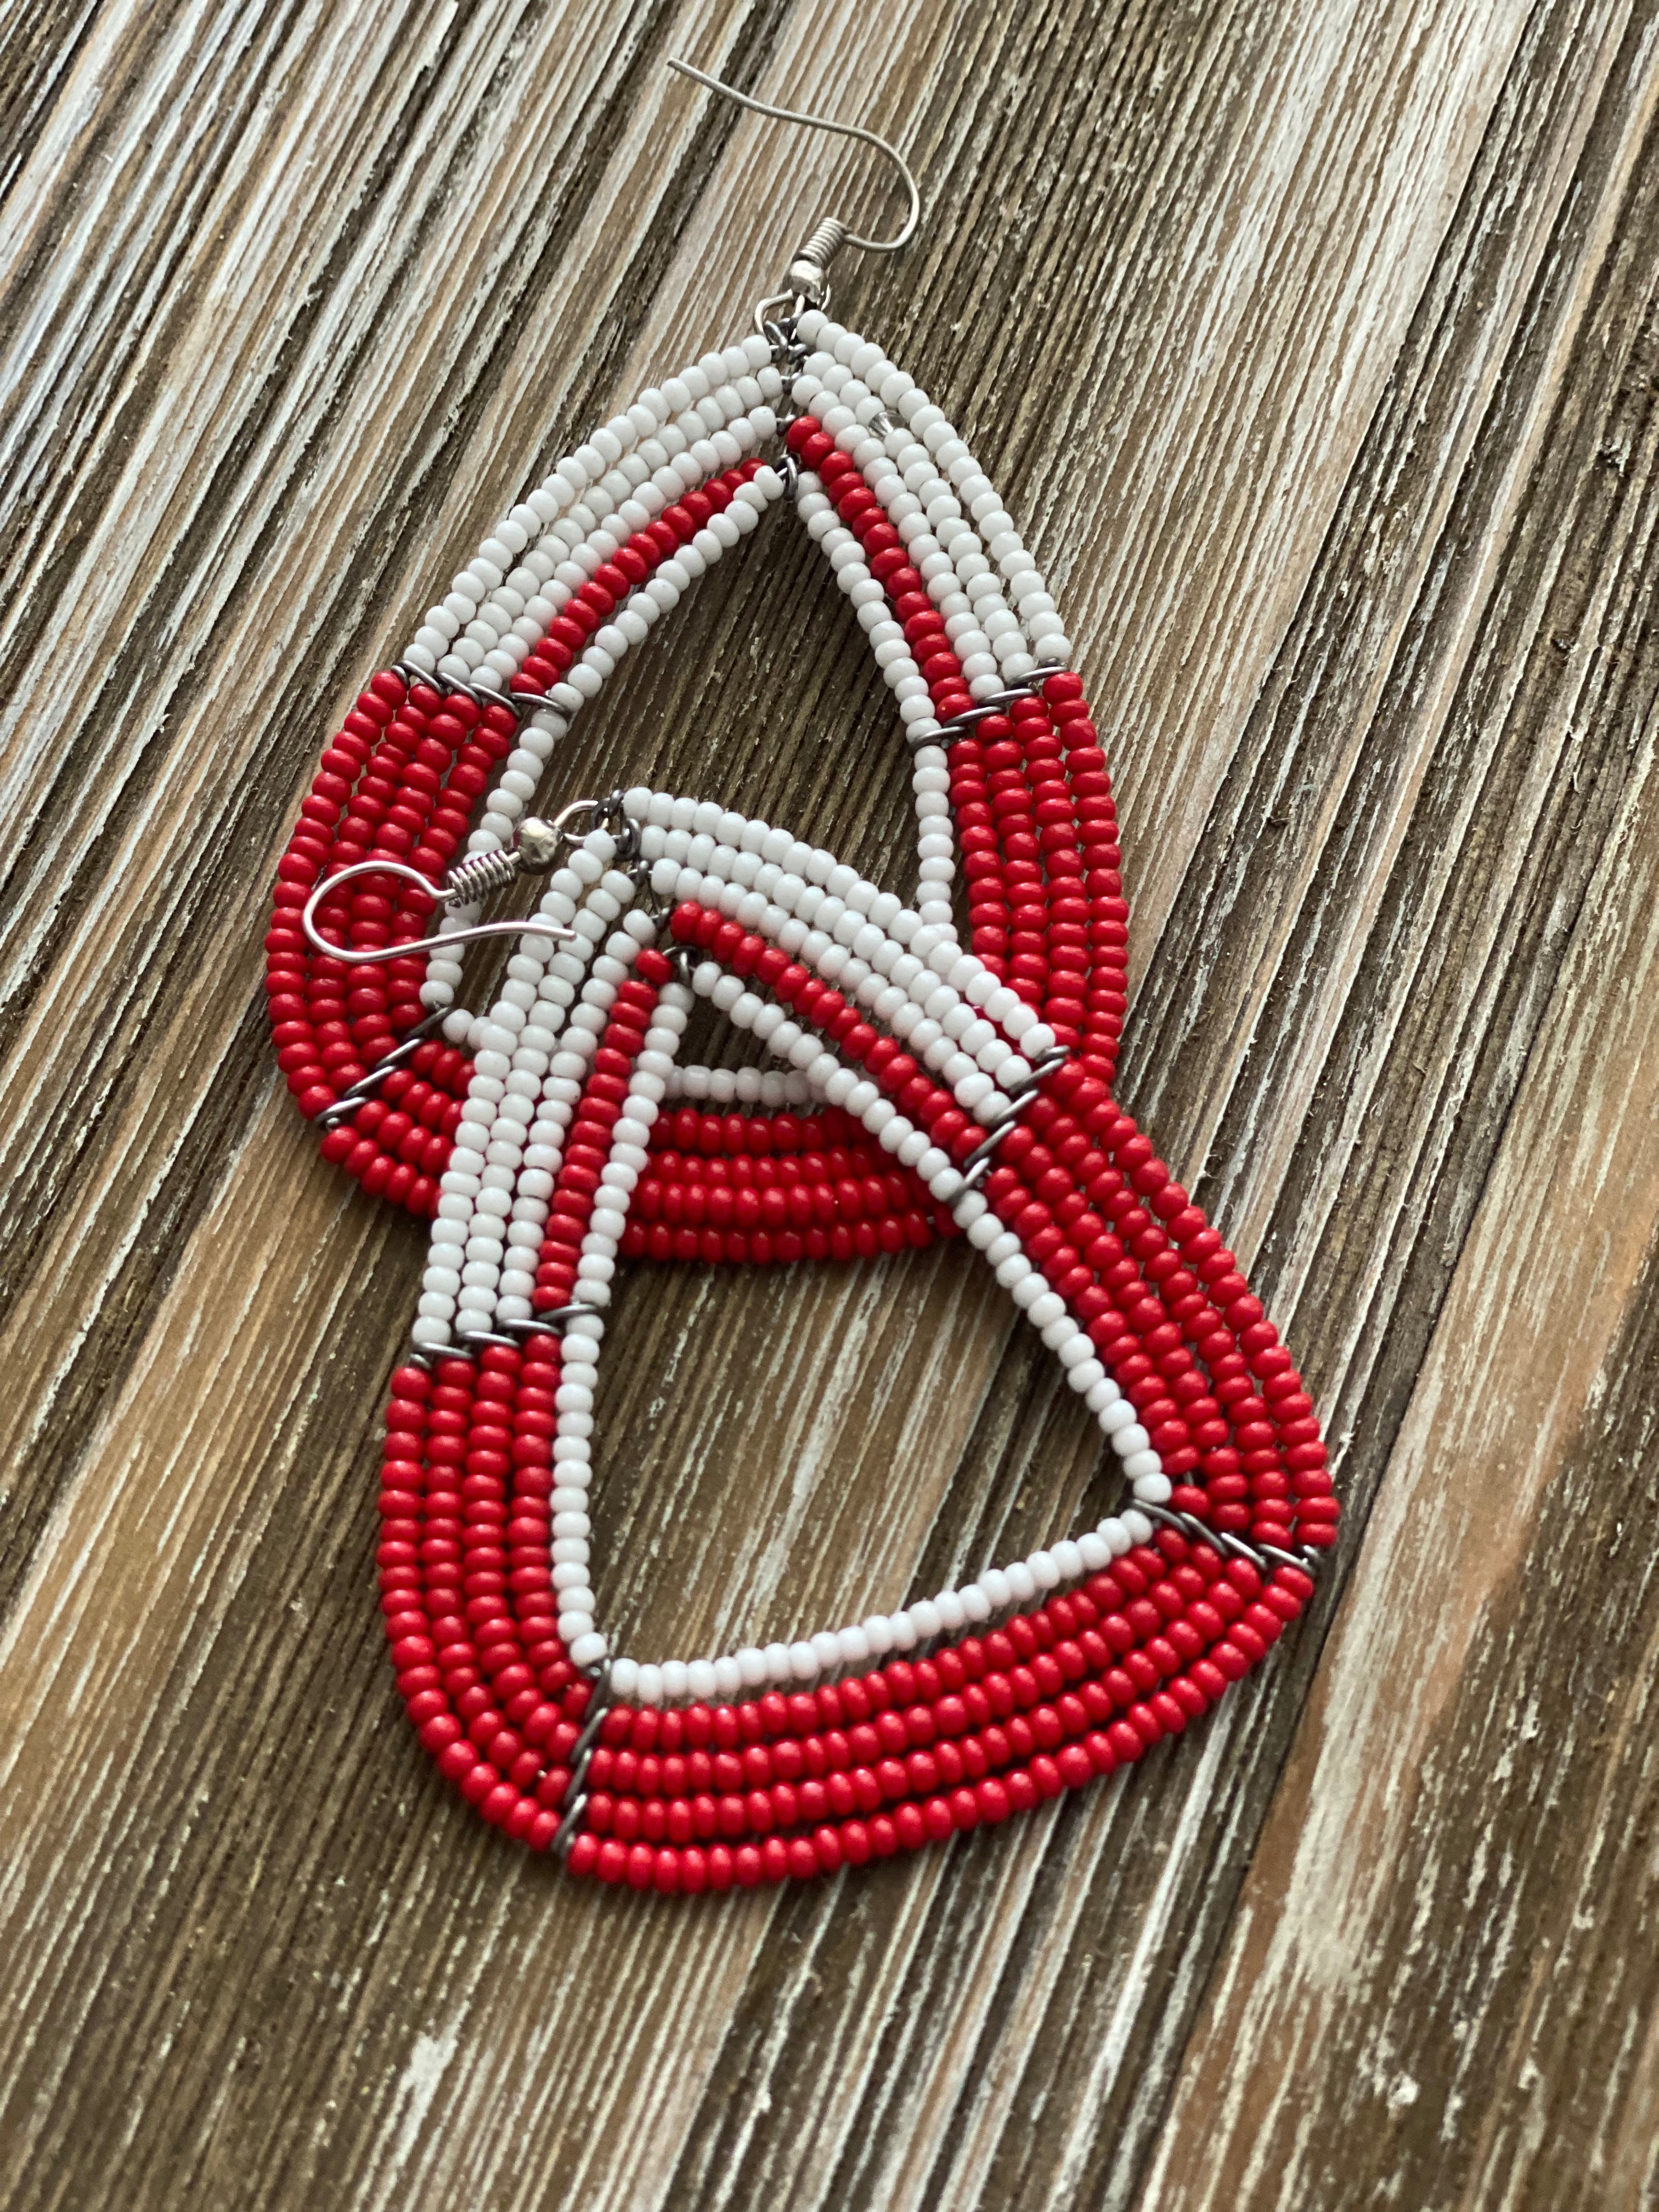 Handmade Beaded Red and White Pyramid Earrings - Assorted